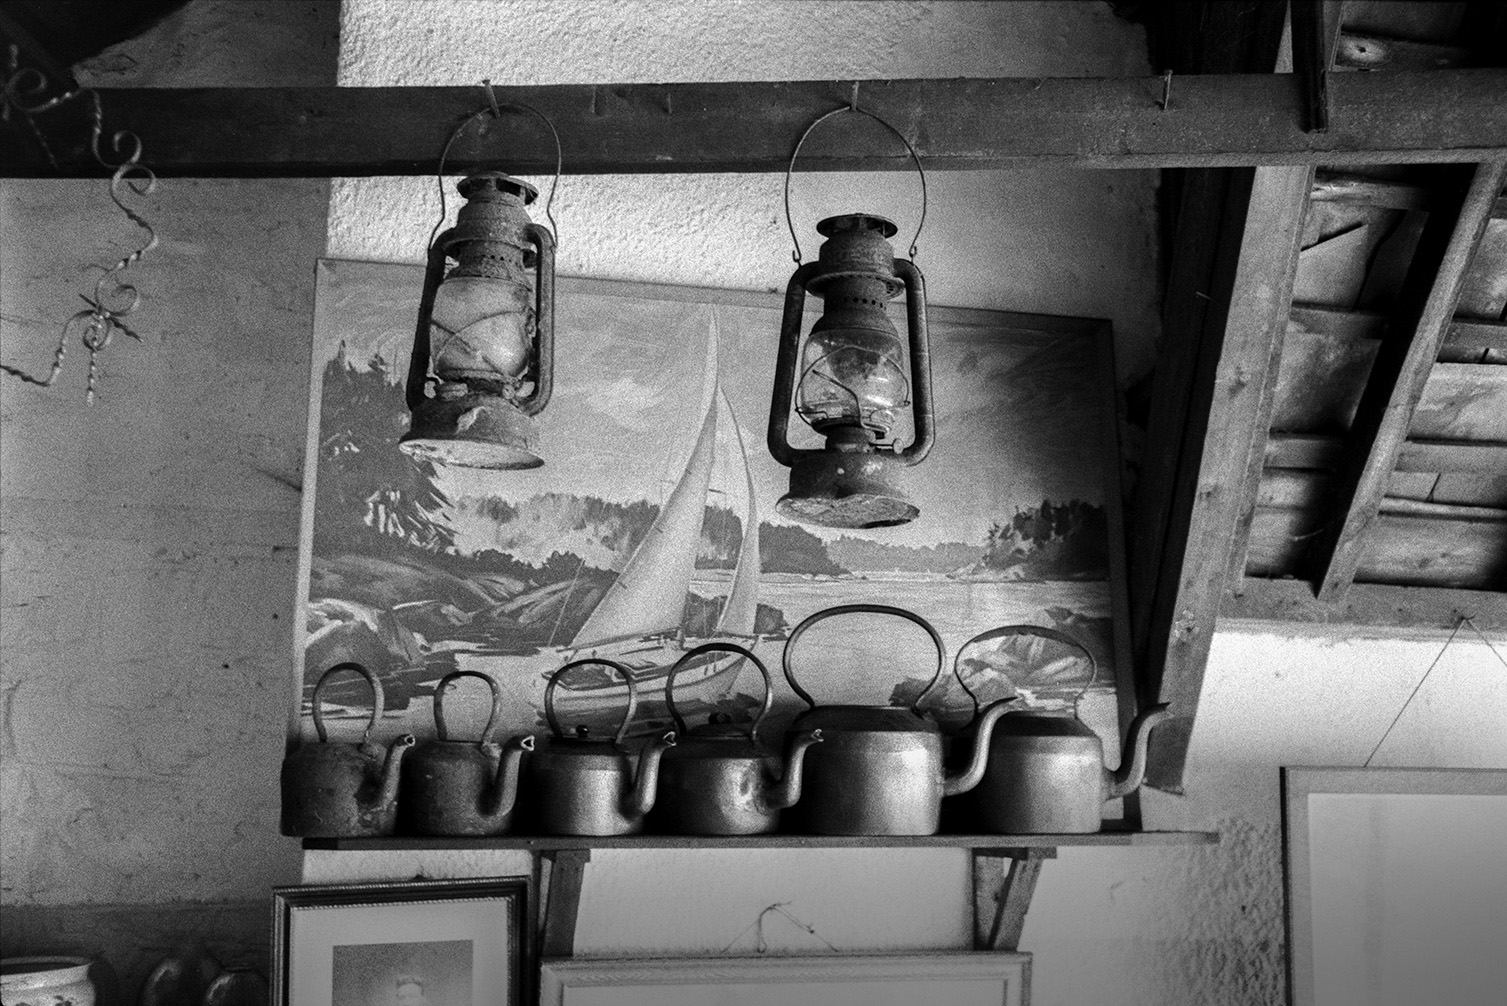 Interior of Mrs Moantes Antique Shop in Chittlehampton. A row of kettles on a shelf, paintings and lamps are visible.